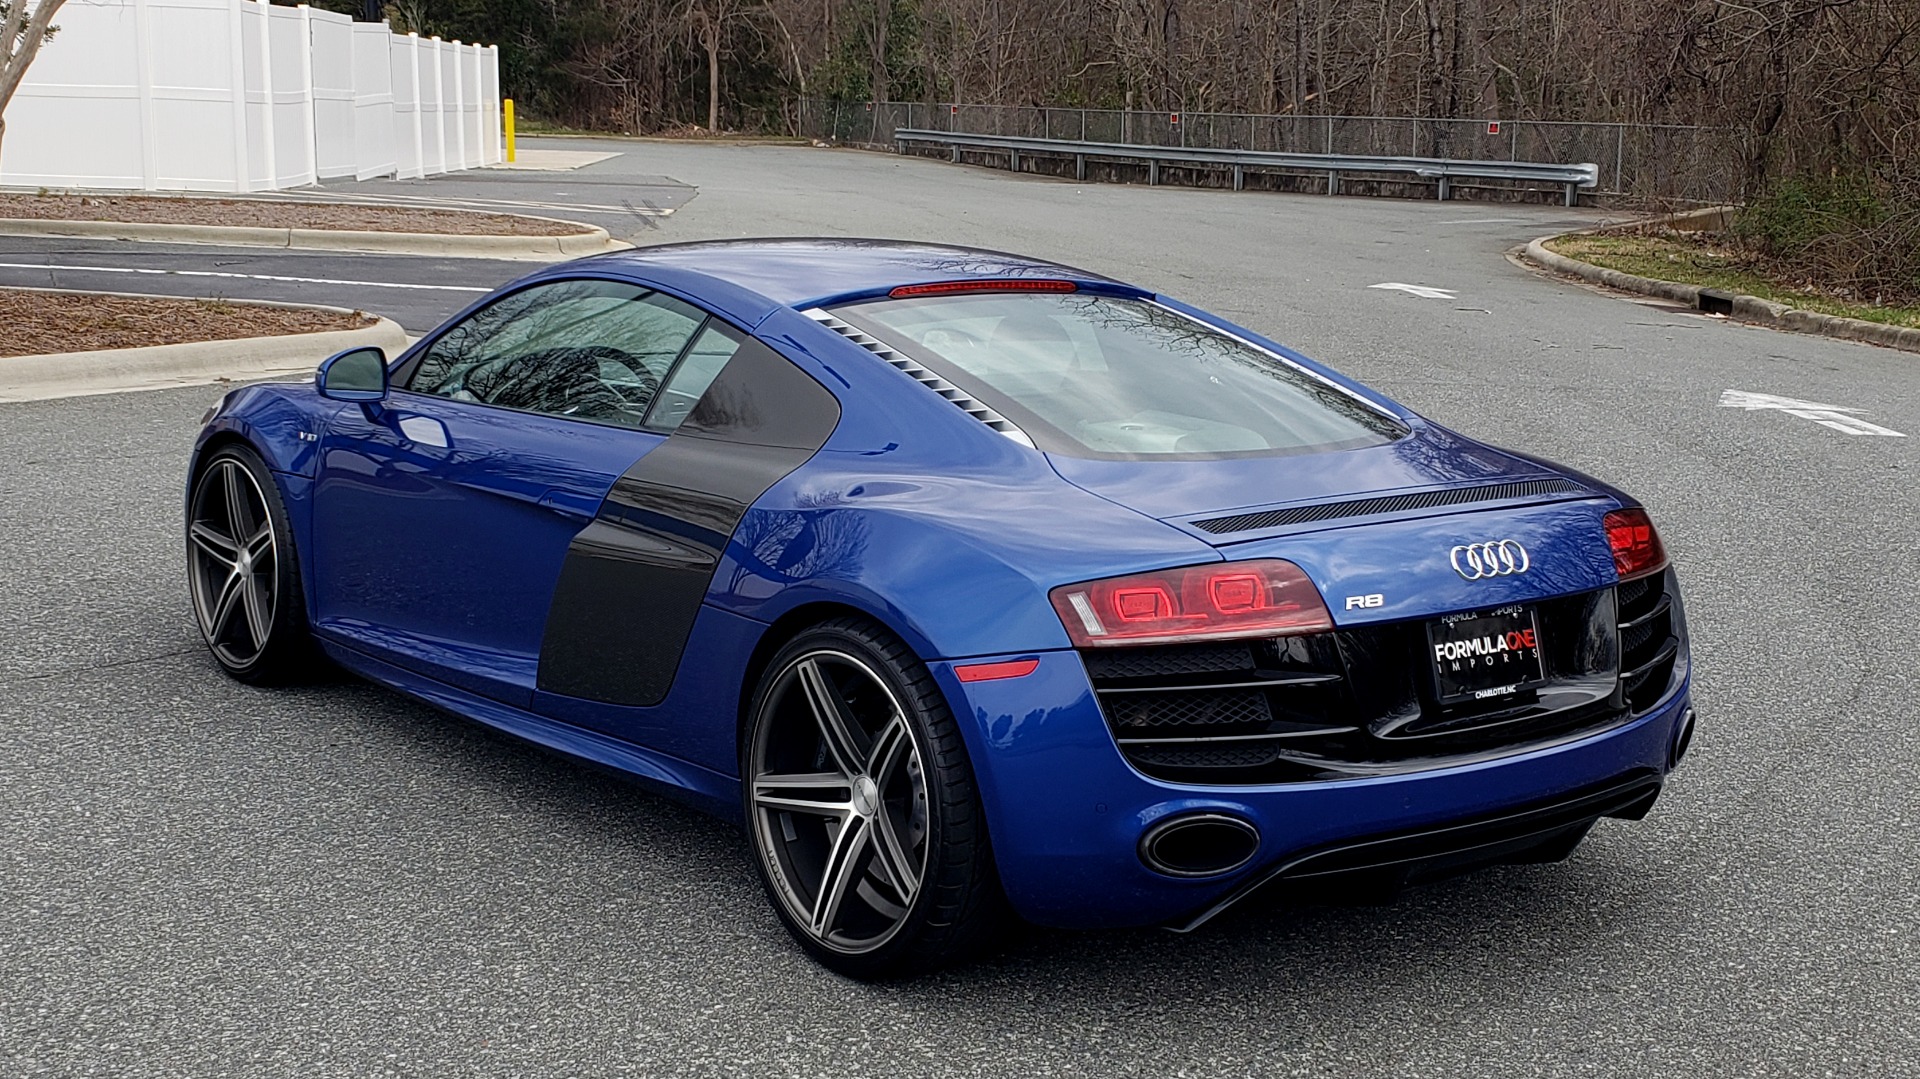 Used 2010 Audi R8 5.2L V10 / AWD / COUPE / NAV / 6-SPD AUTO / CUSTOM WHEELS for sale Sold at Formula Imports in Charlotte NC 28227 4